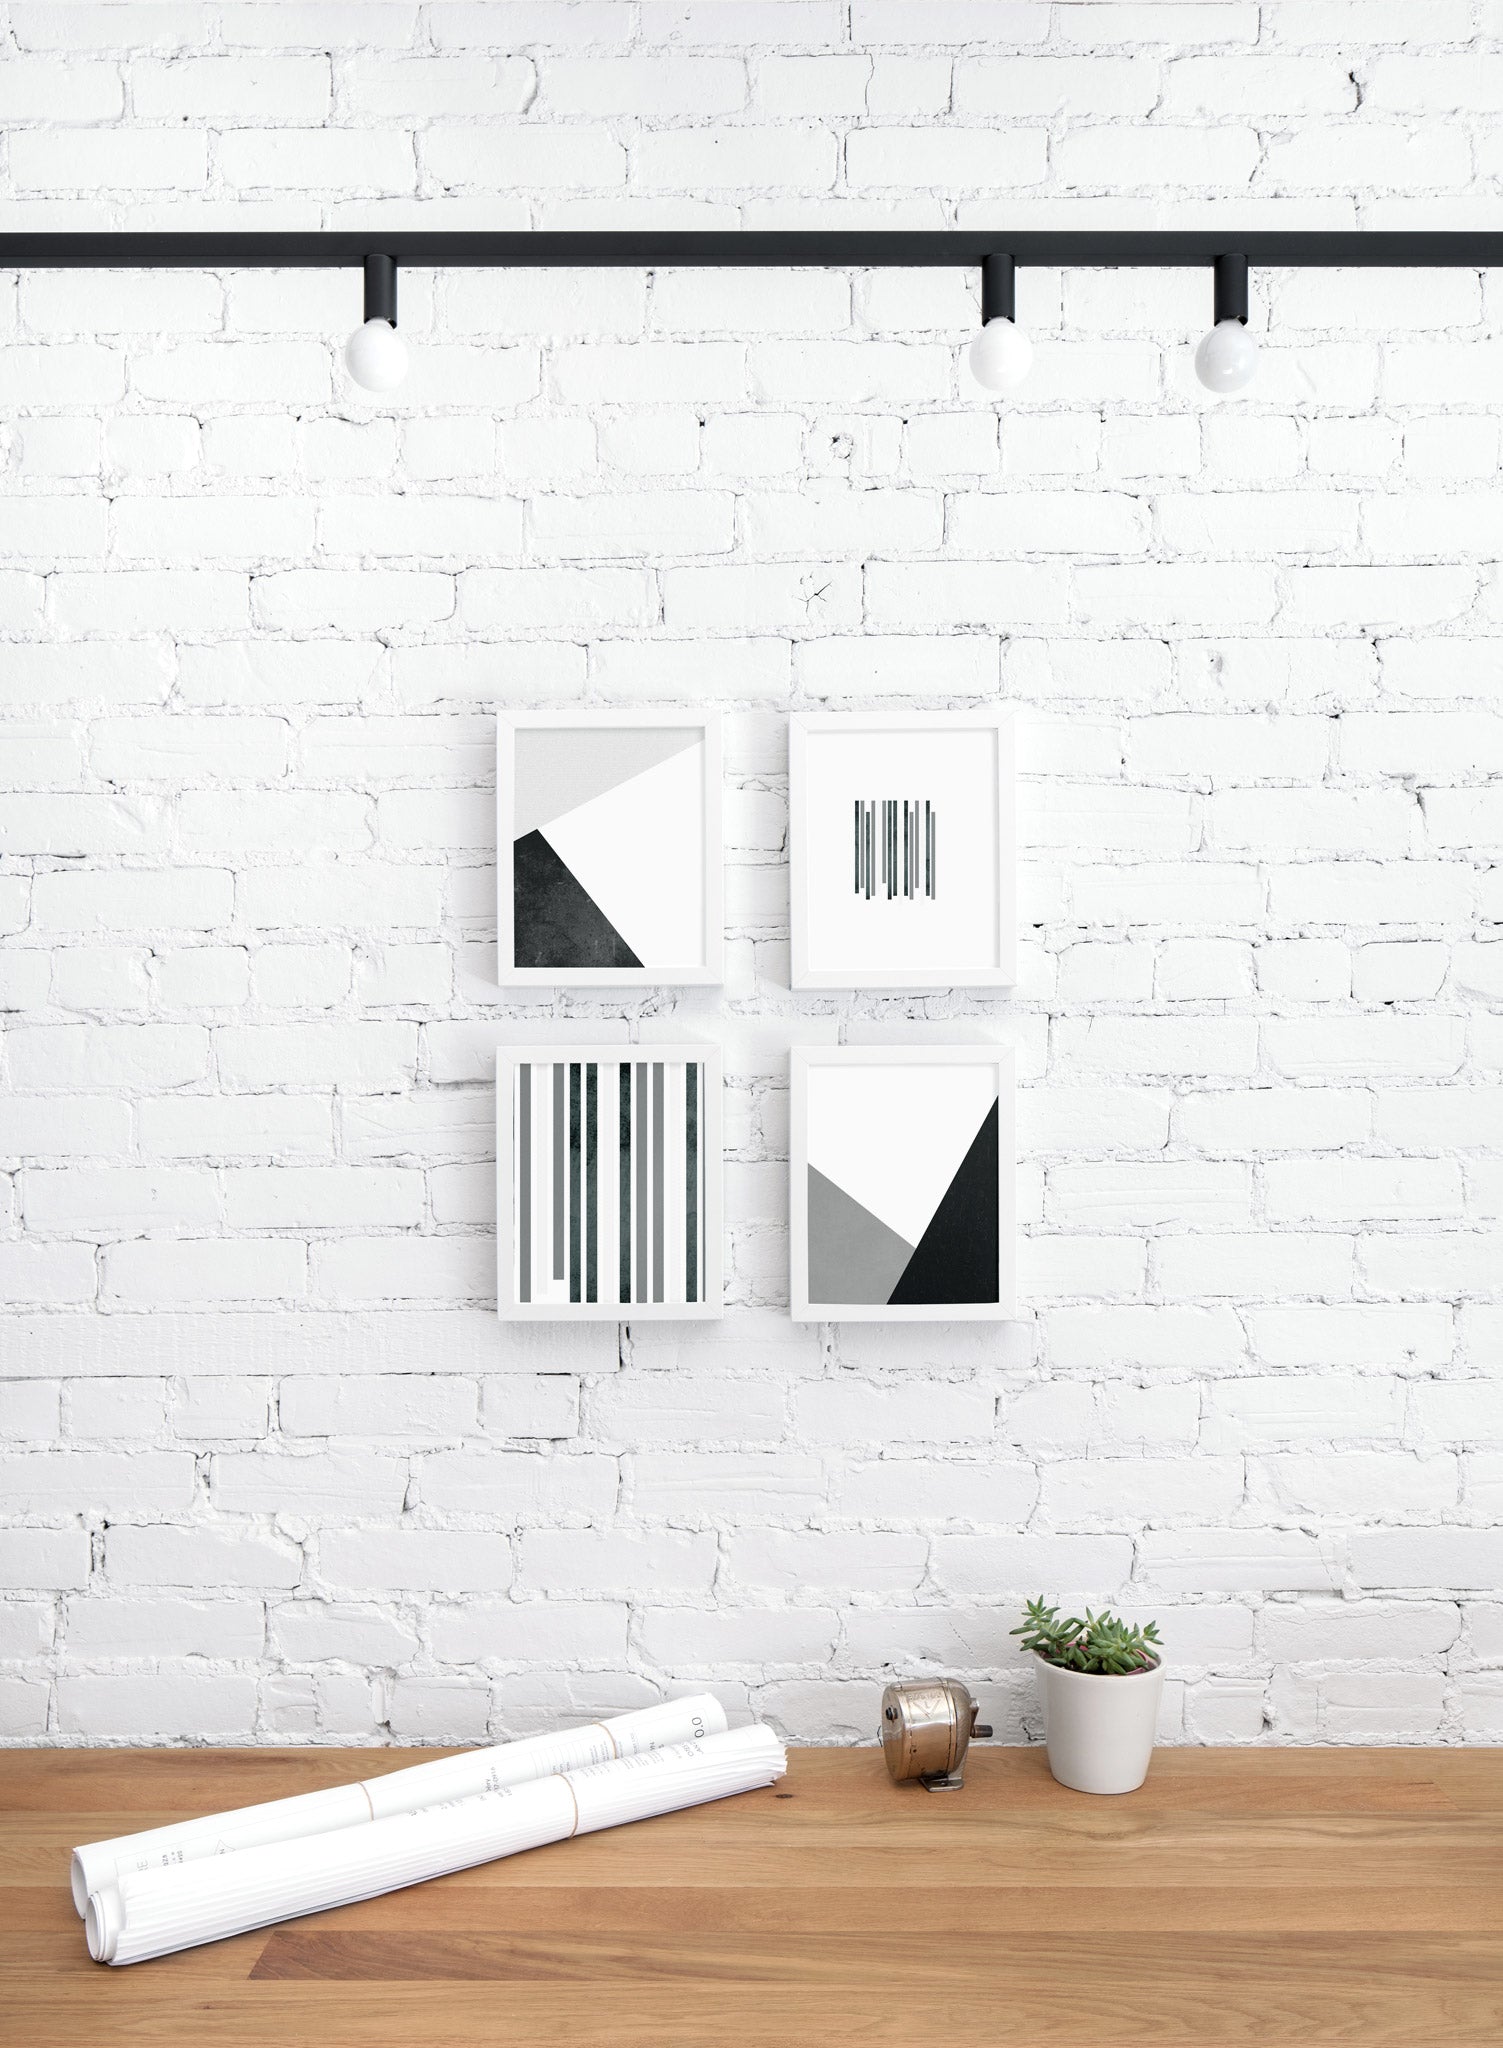 Scandinavian art print by Opposite Wall with with black and white abstract graphic design - Zoom In - Personal office